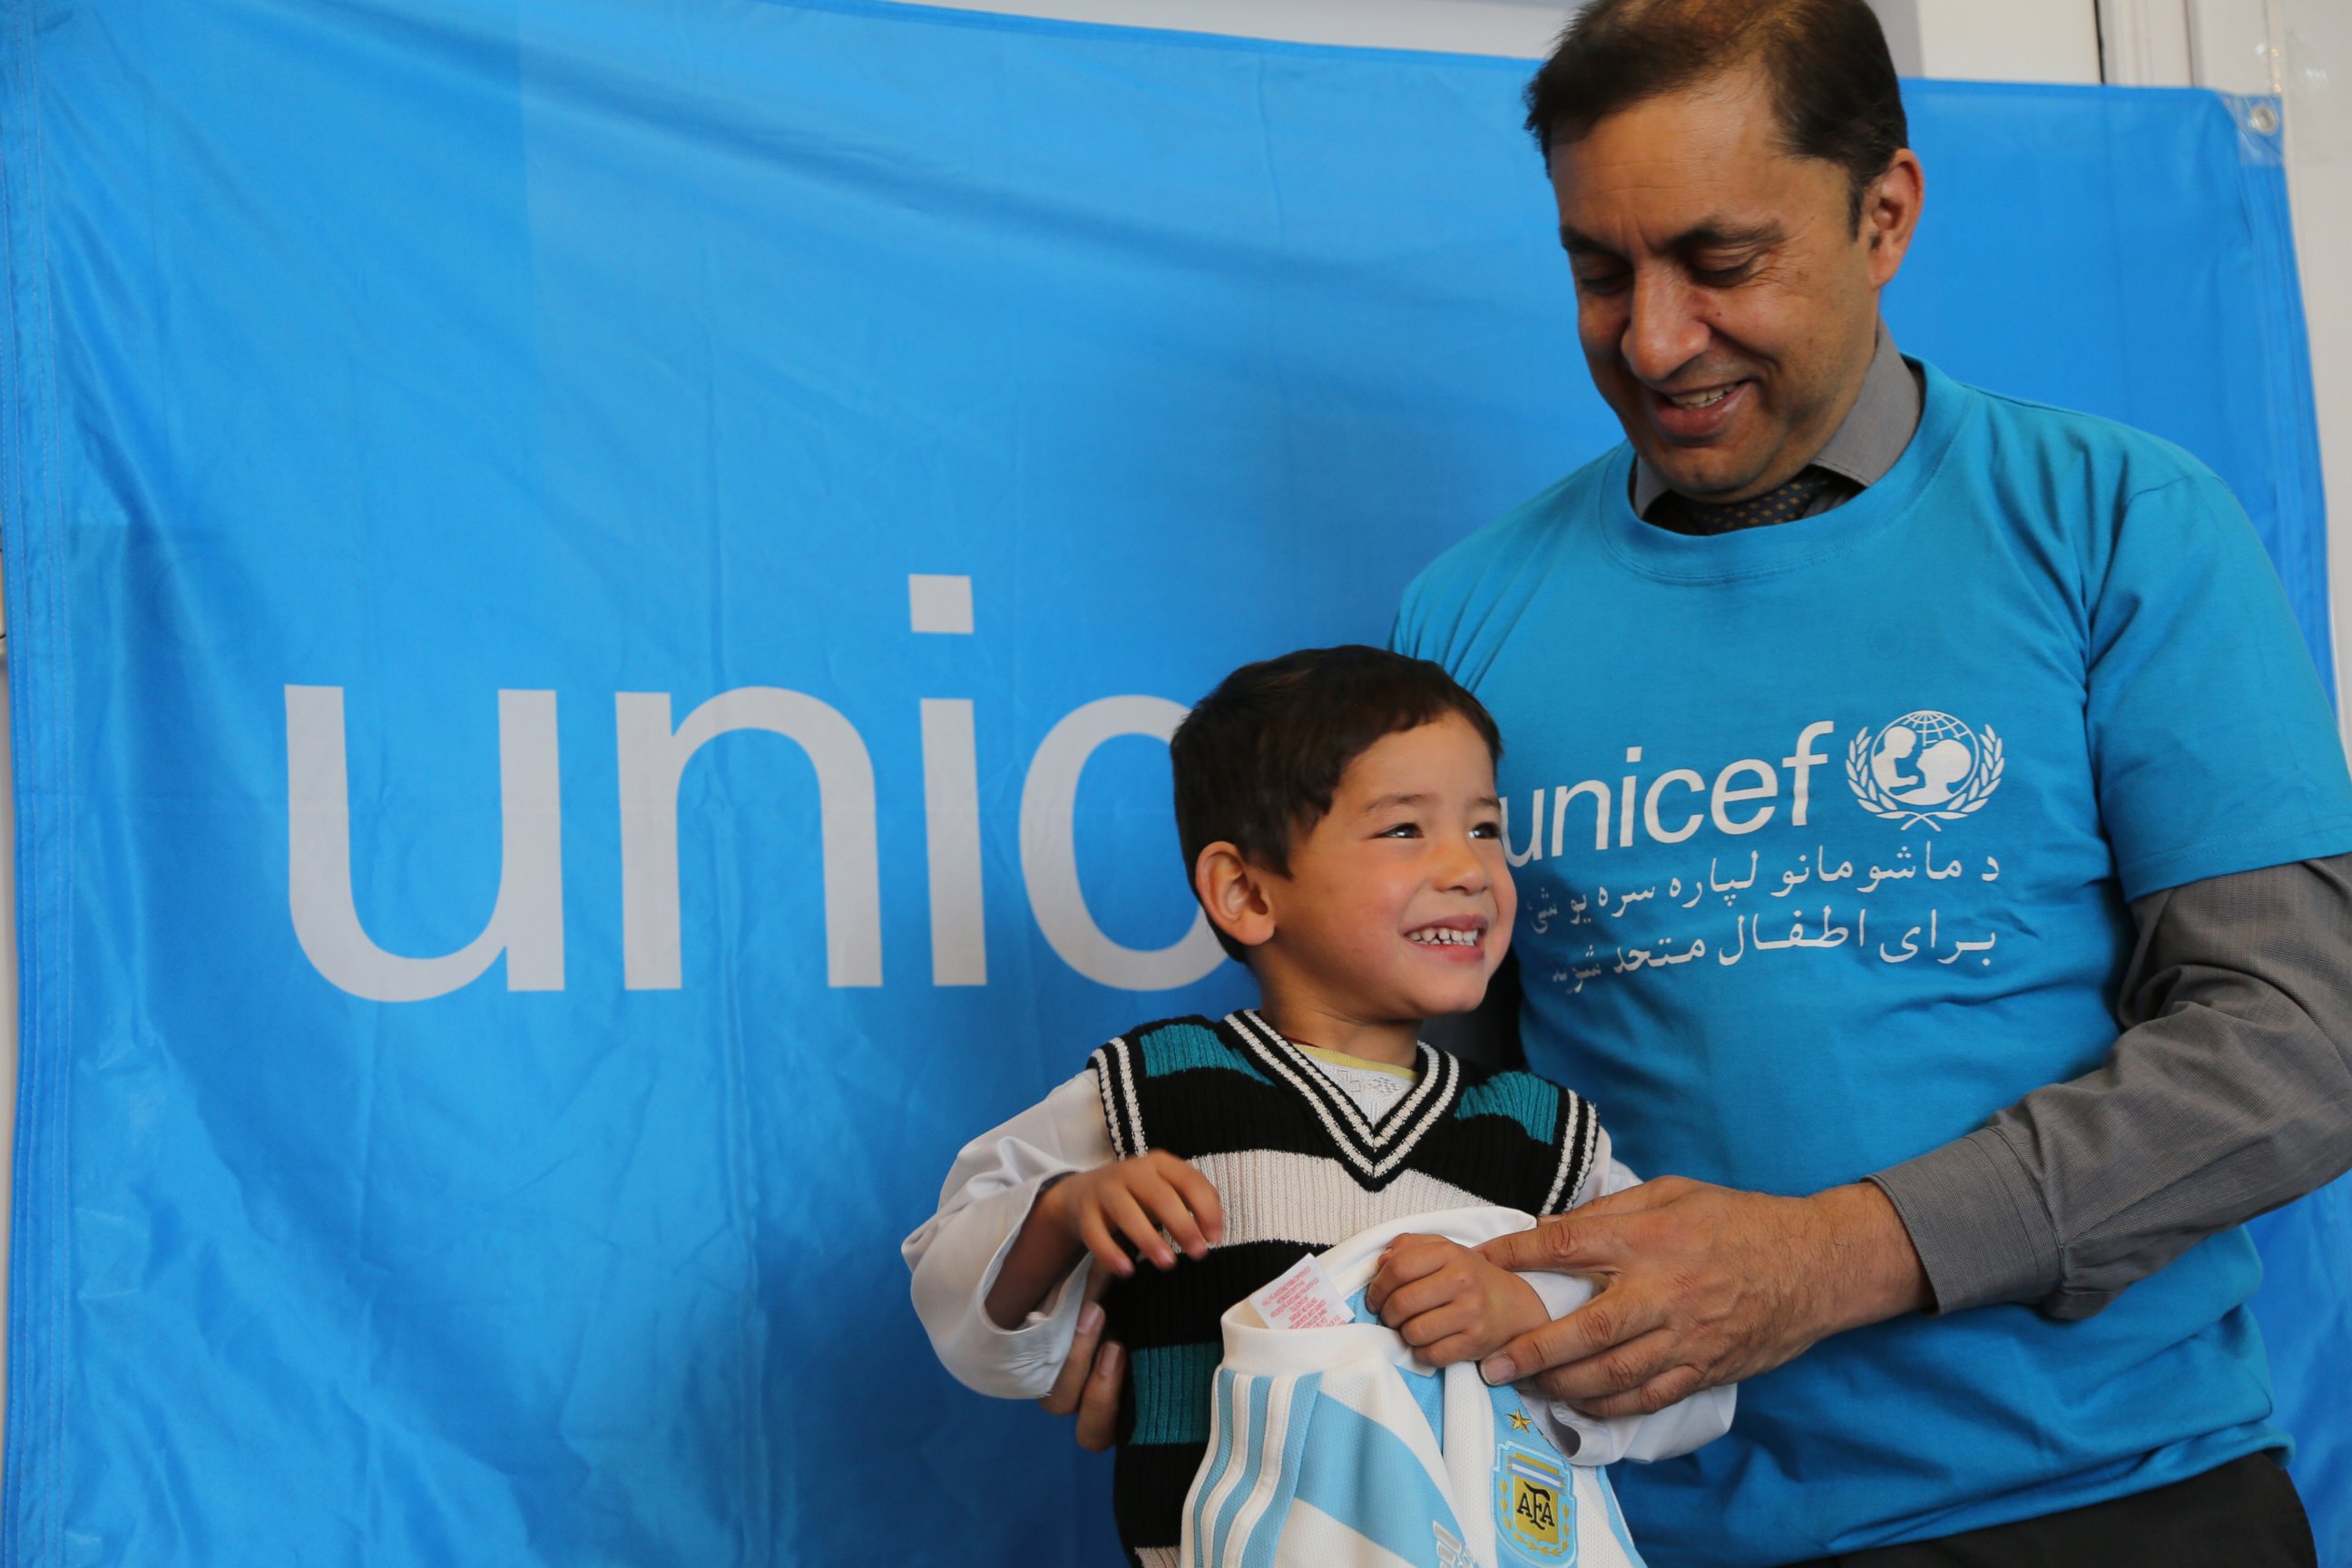 PHOTO: As of today, Murtaza Ahmadi can proudly show off the new signed jerseys and a football he received from UNICEF Goodwill Ambassador Leo Messi. Murtaza's photo went viral after he was pictured wearing a soccer jersey made from a plastic bag.